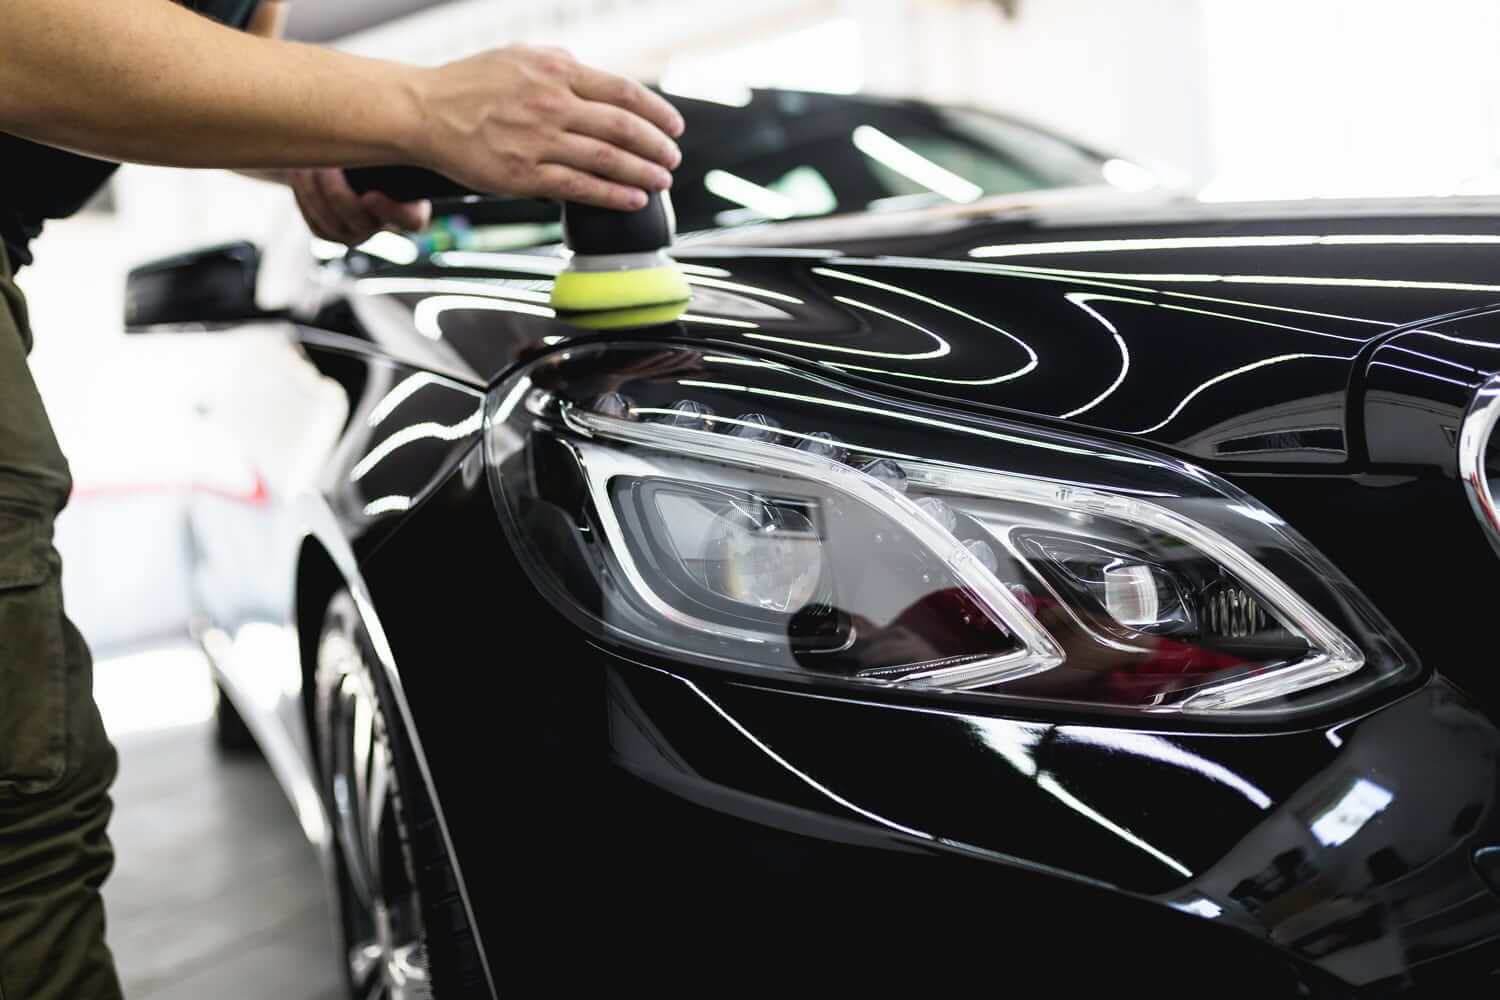 5 Steps to Protect Your Car's Clear Coat - The News Wheel